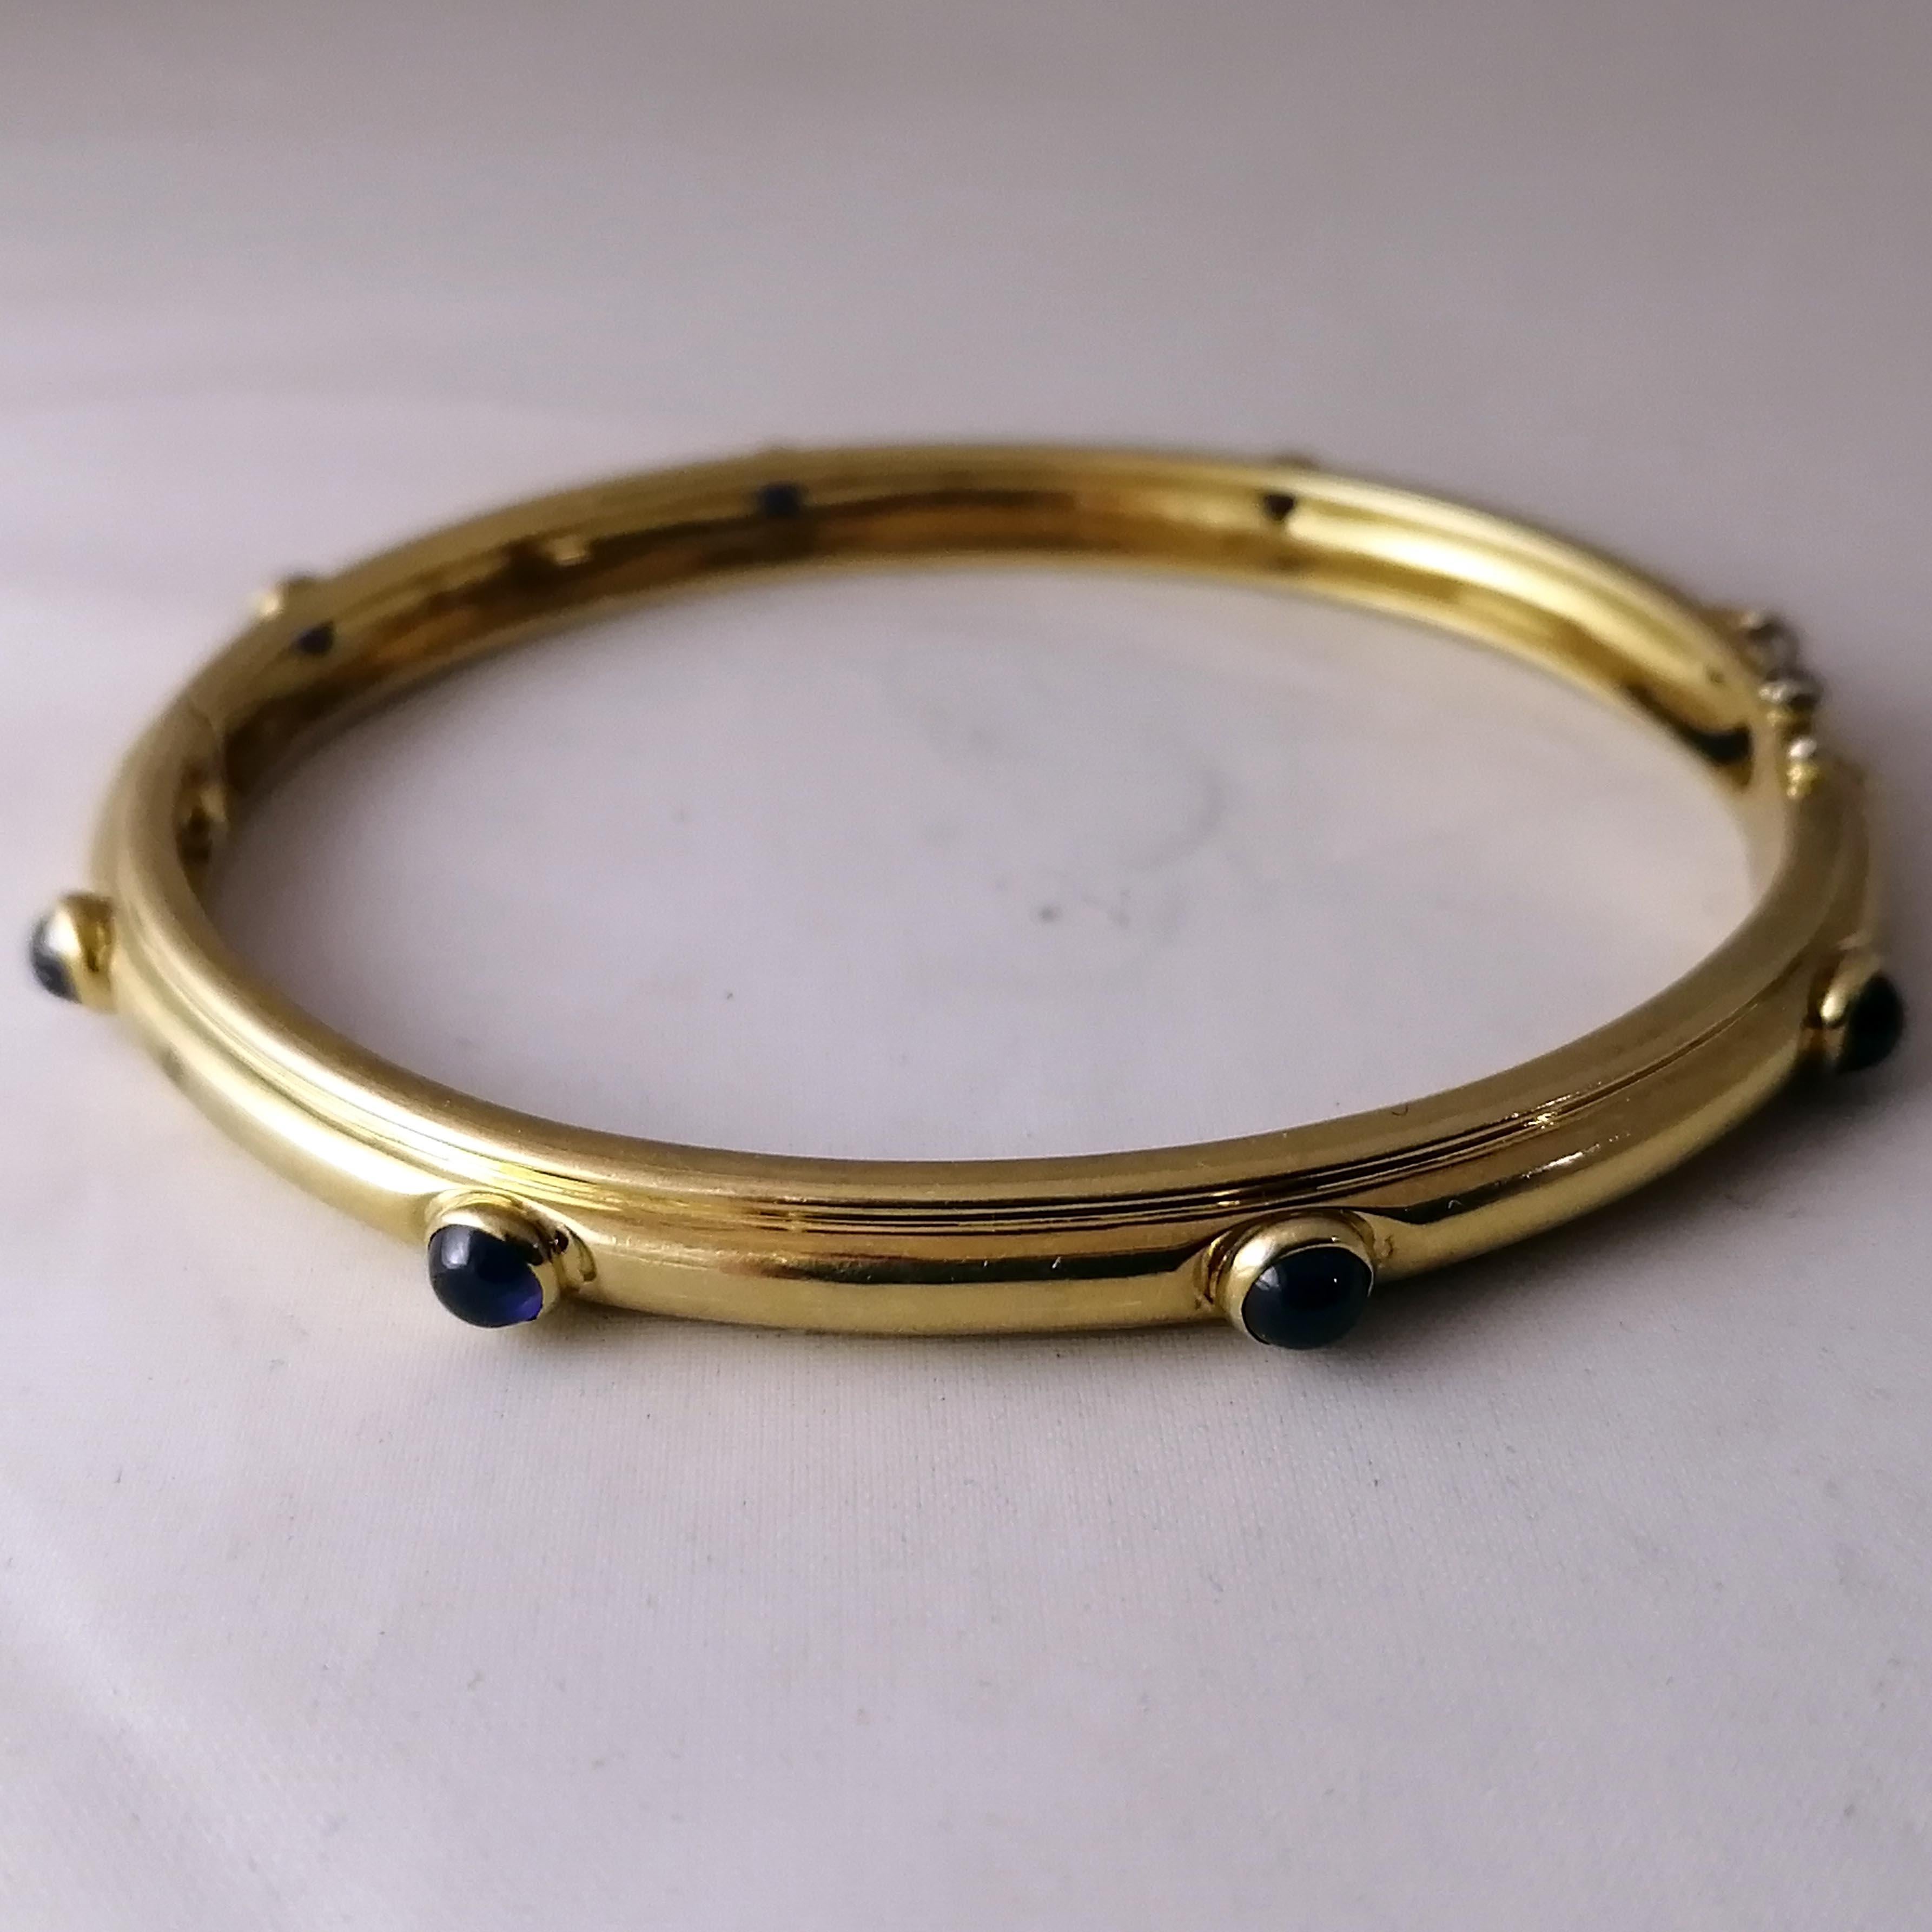 A fabulous Italian made 18-karat gold and sapphires bangle bracelet by Tiffany & Co. The hinged bangle has 8 bezel set cabochon sapphires and safety chain. The piece is marked on the interior with the Tiffany & Co. logo, the 750 mark and the ITALY